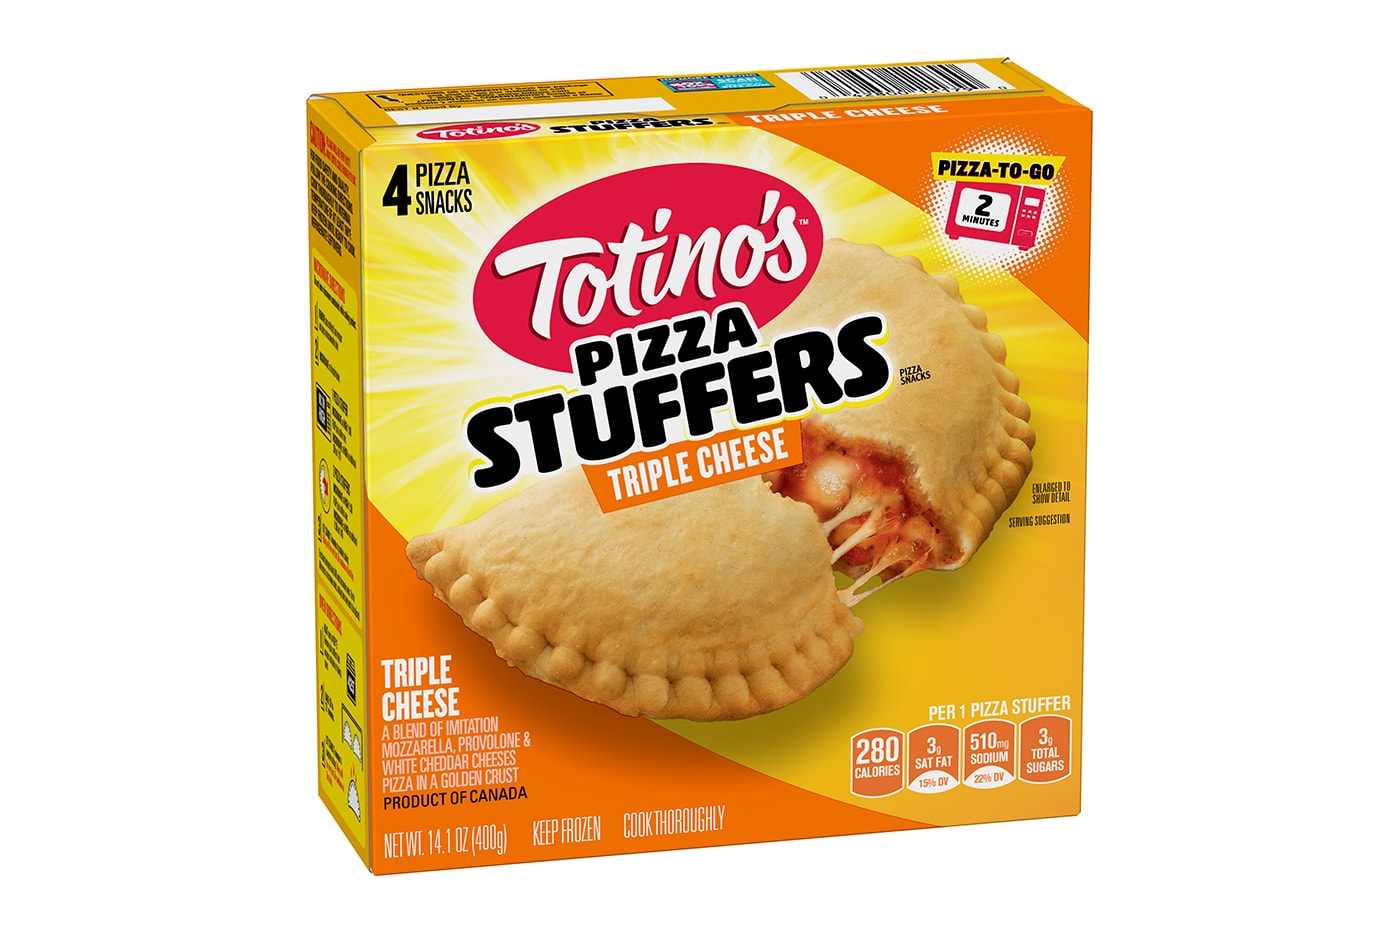 Totino's Pizza Rolls Minis Gamer Pack Release Lil Yachty FaZe Clan Info